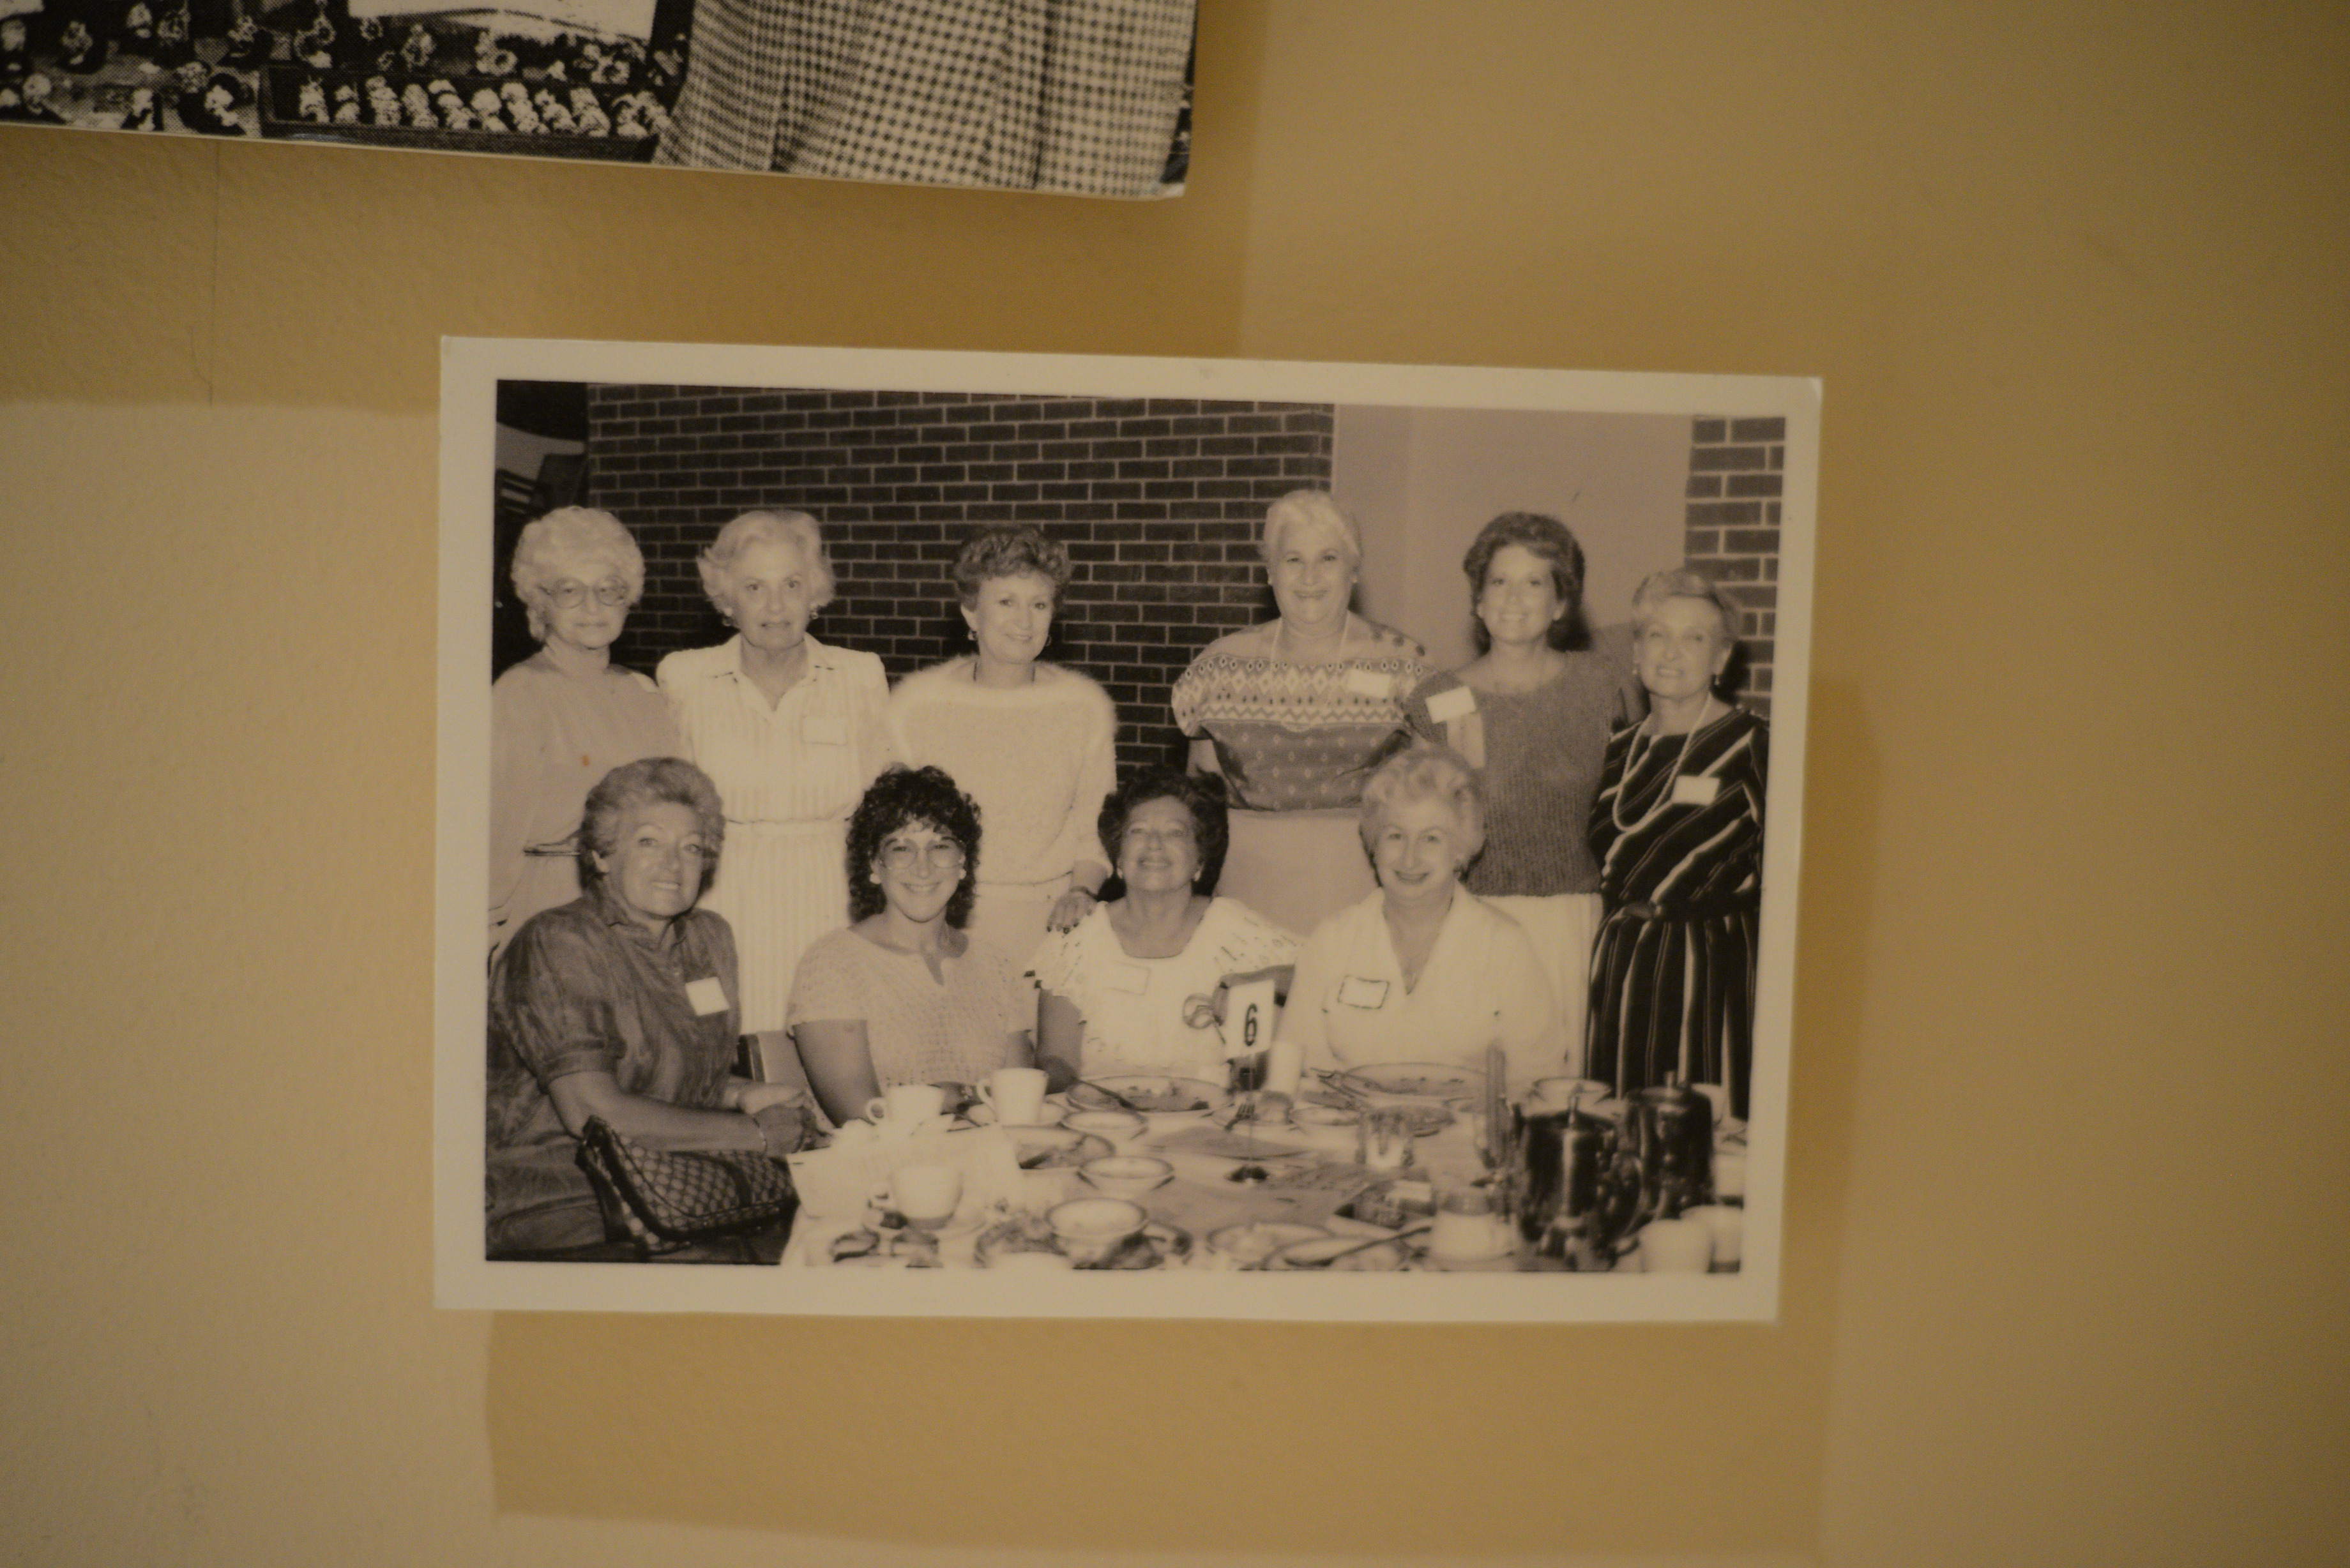 Photograph of a group of women at tea party, date unknown